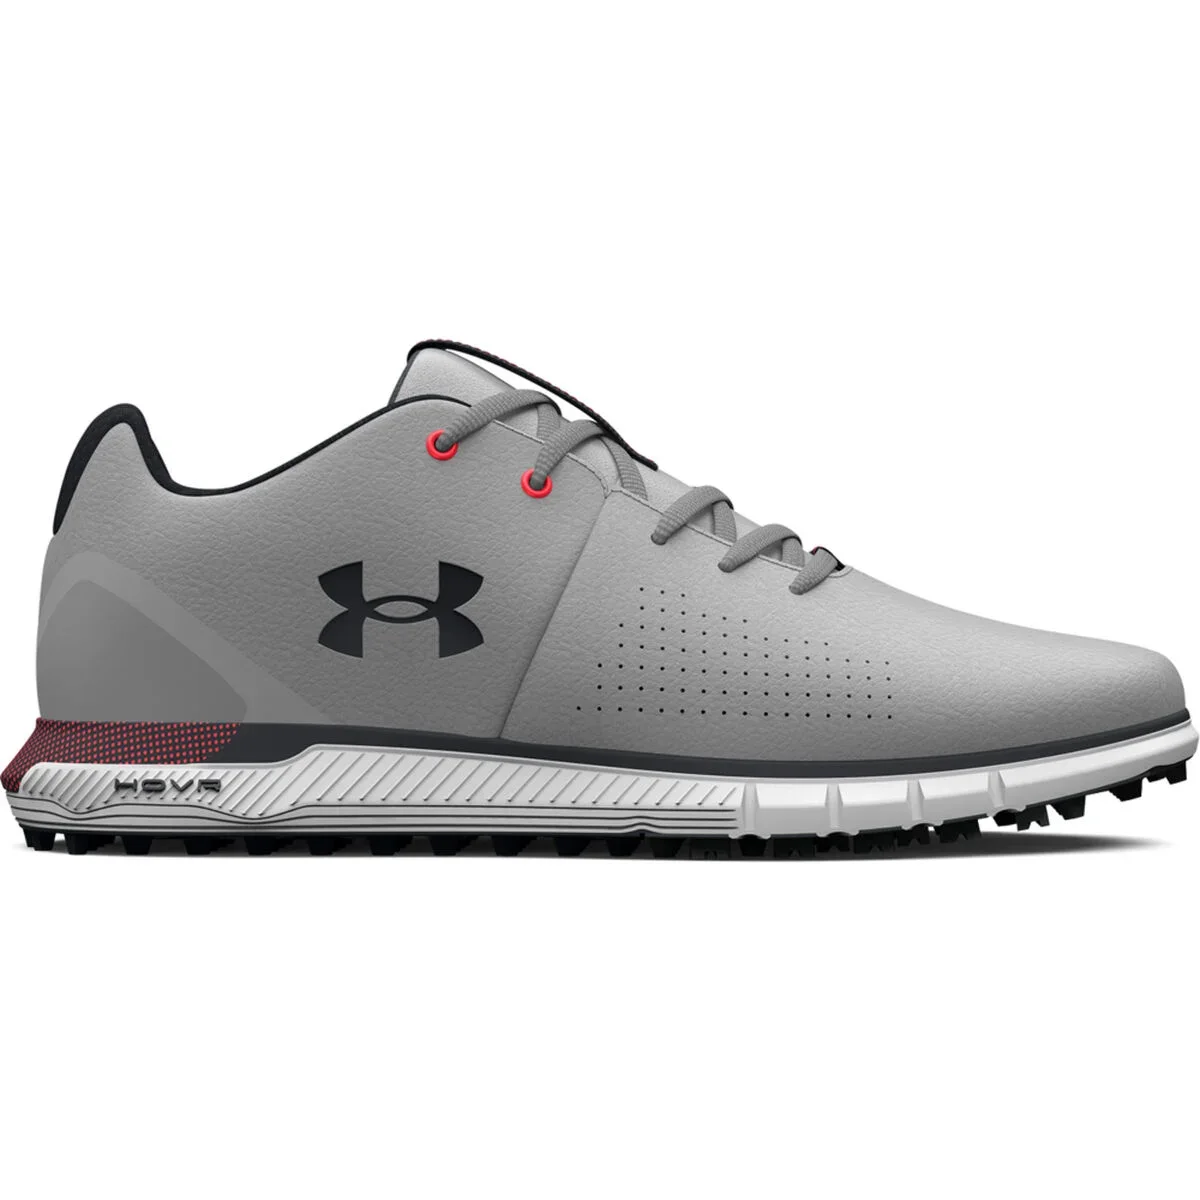 12 modern and trendy golf shoes for fall: GOLF 2020 Fall Style Guide